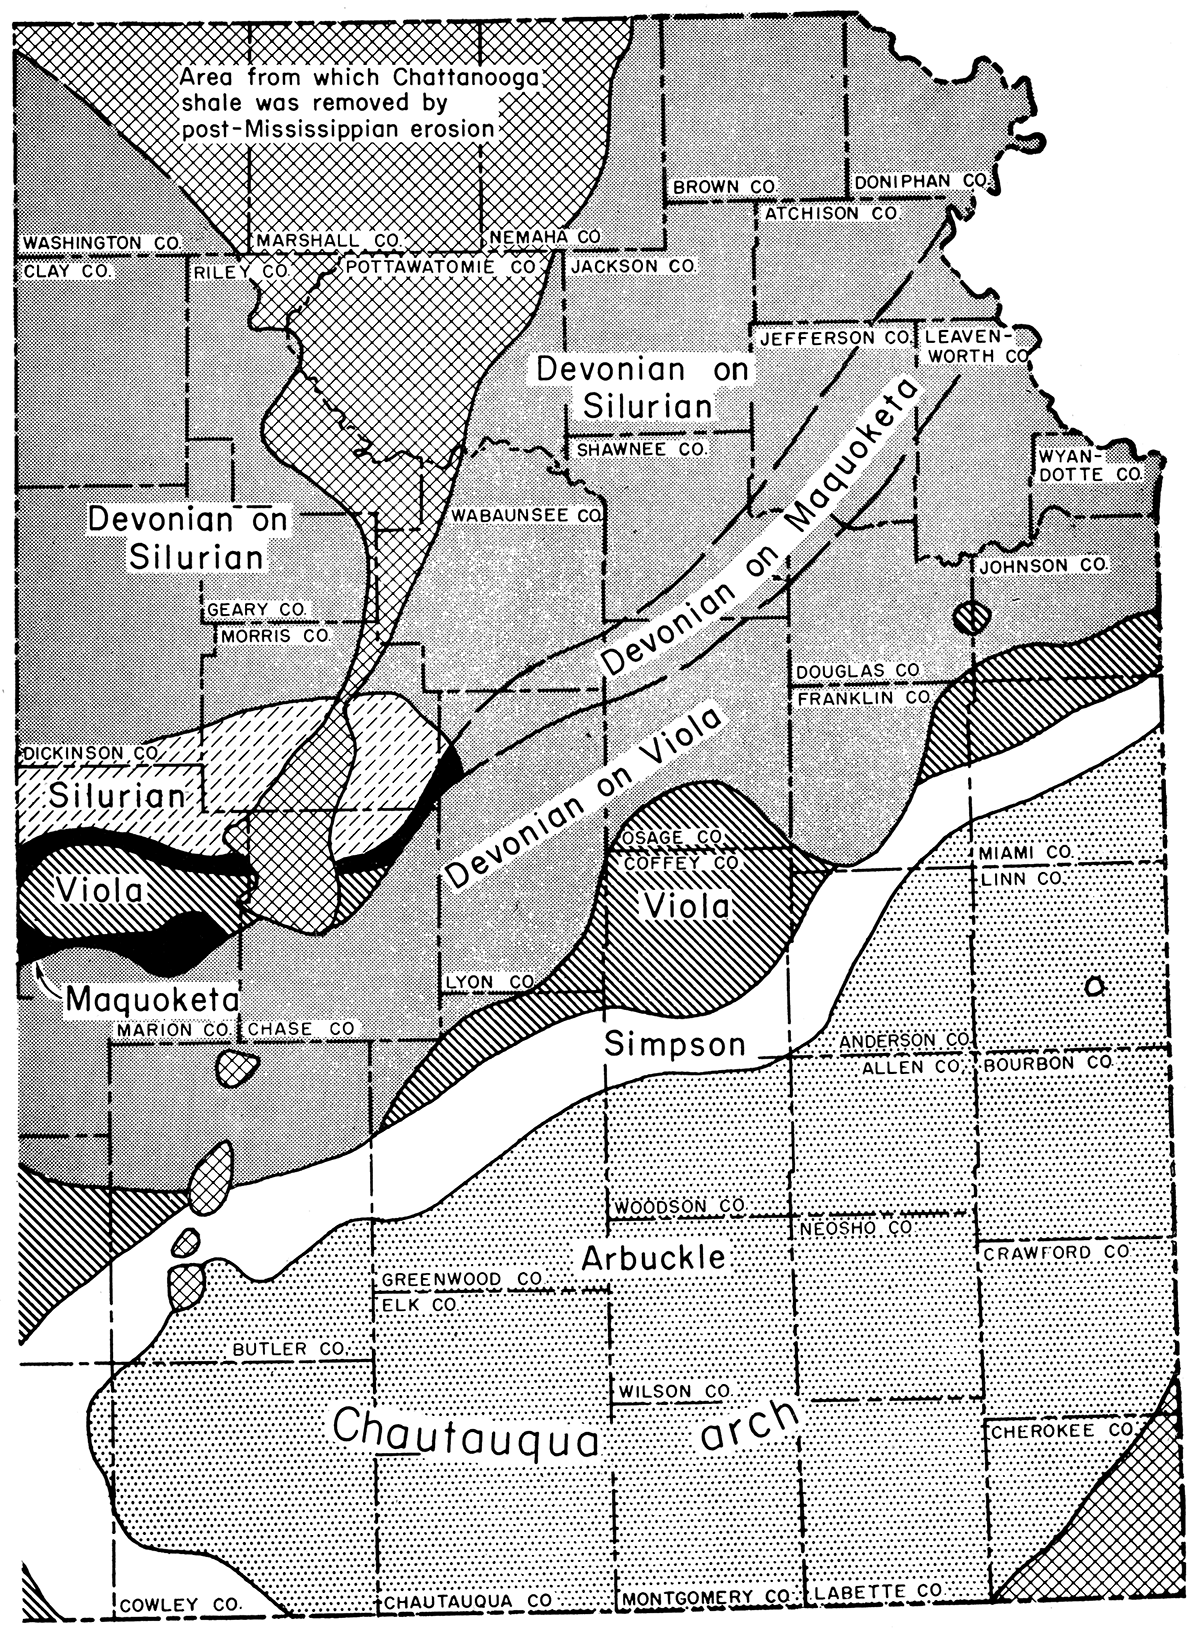 Distribution of formations likely to be encountered immediately below the Chattanooga shale in eastern Kansas.